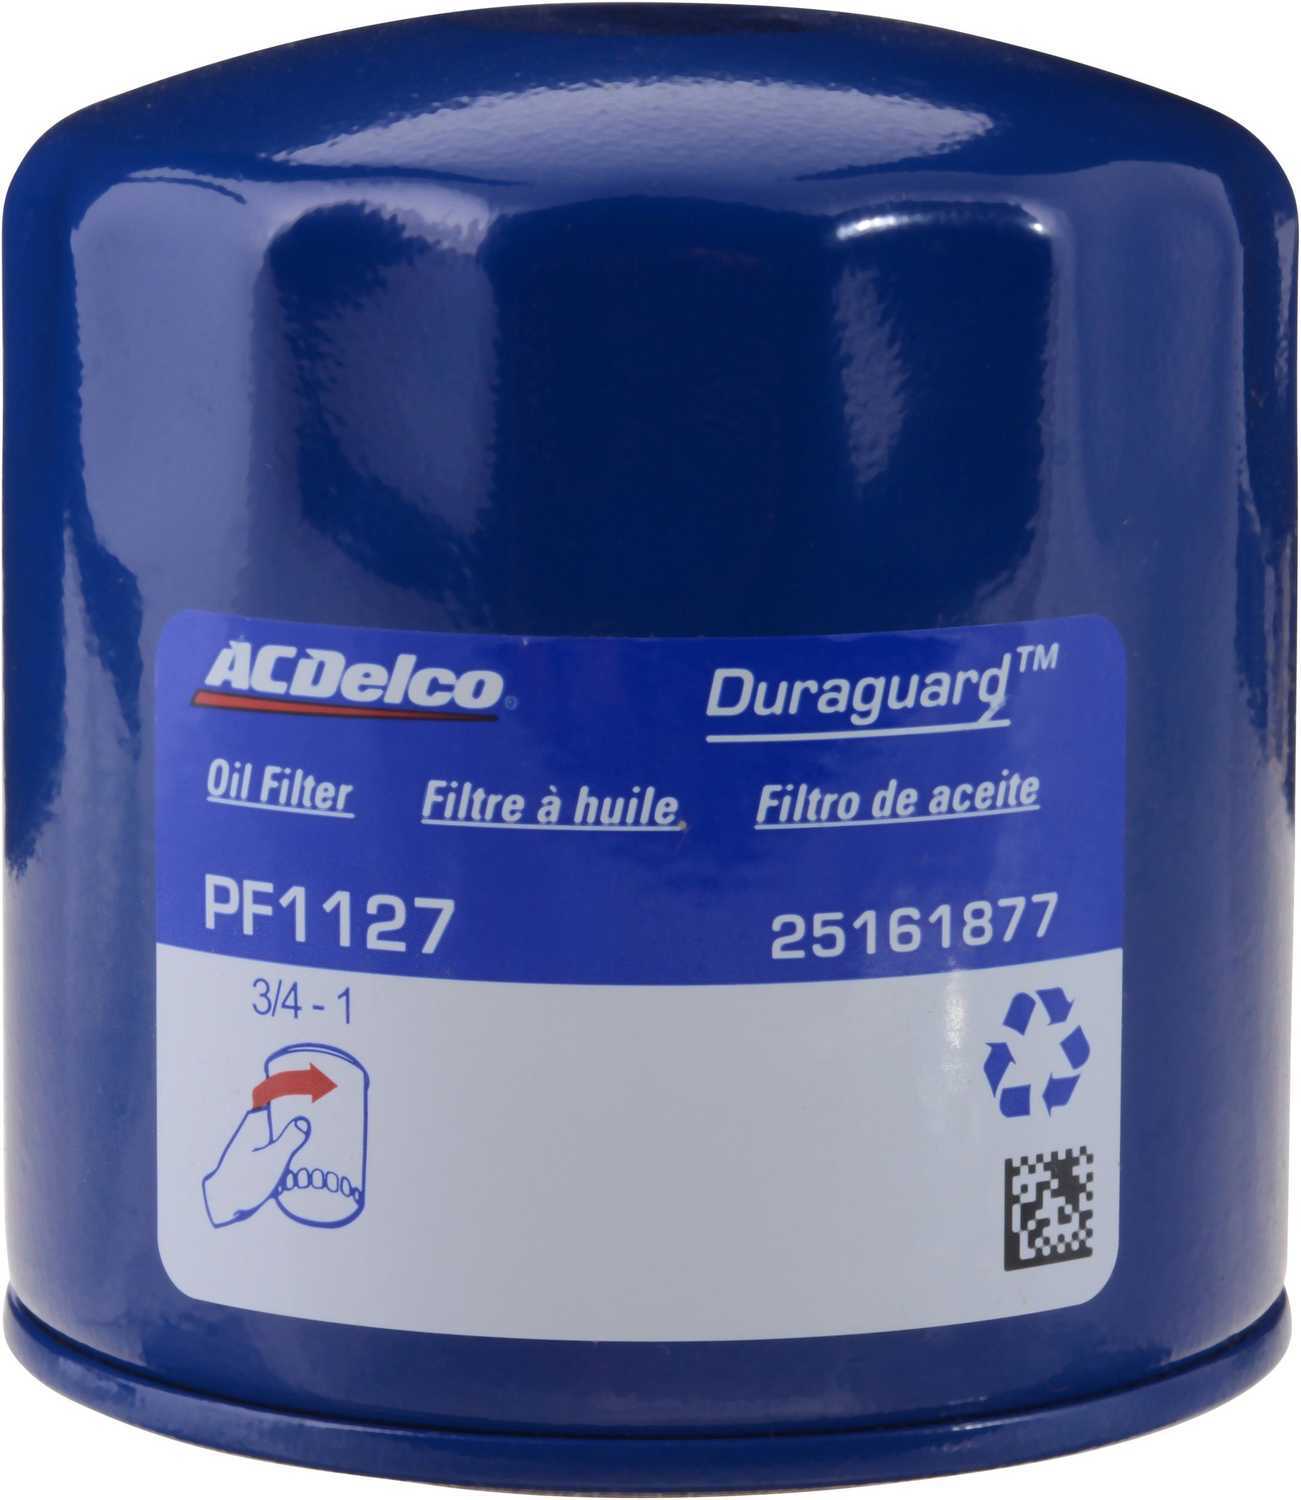 ACDELCO GOLD/PROFESSIONAL - Durapack Engine Oil Filter - Pack of 12 - DCC PF1127F